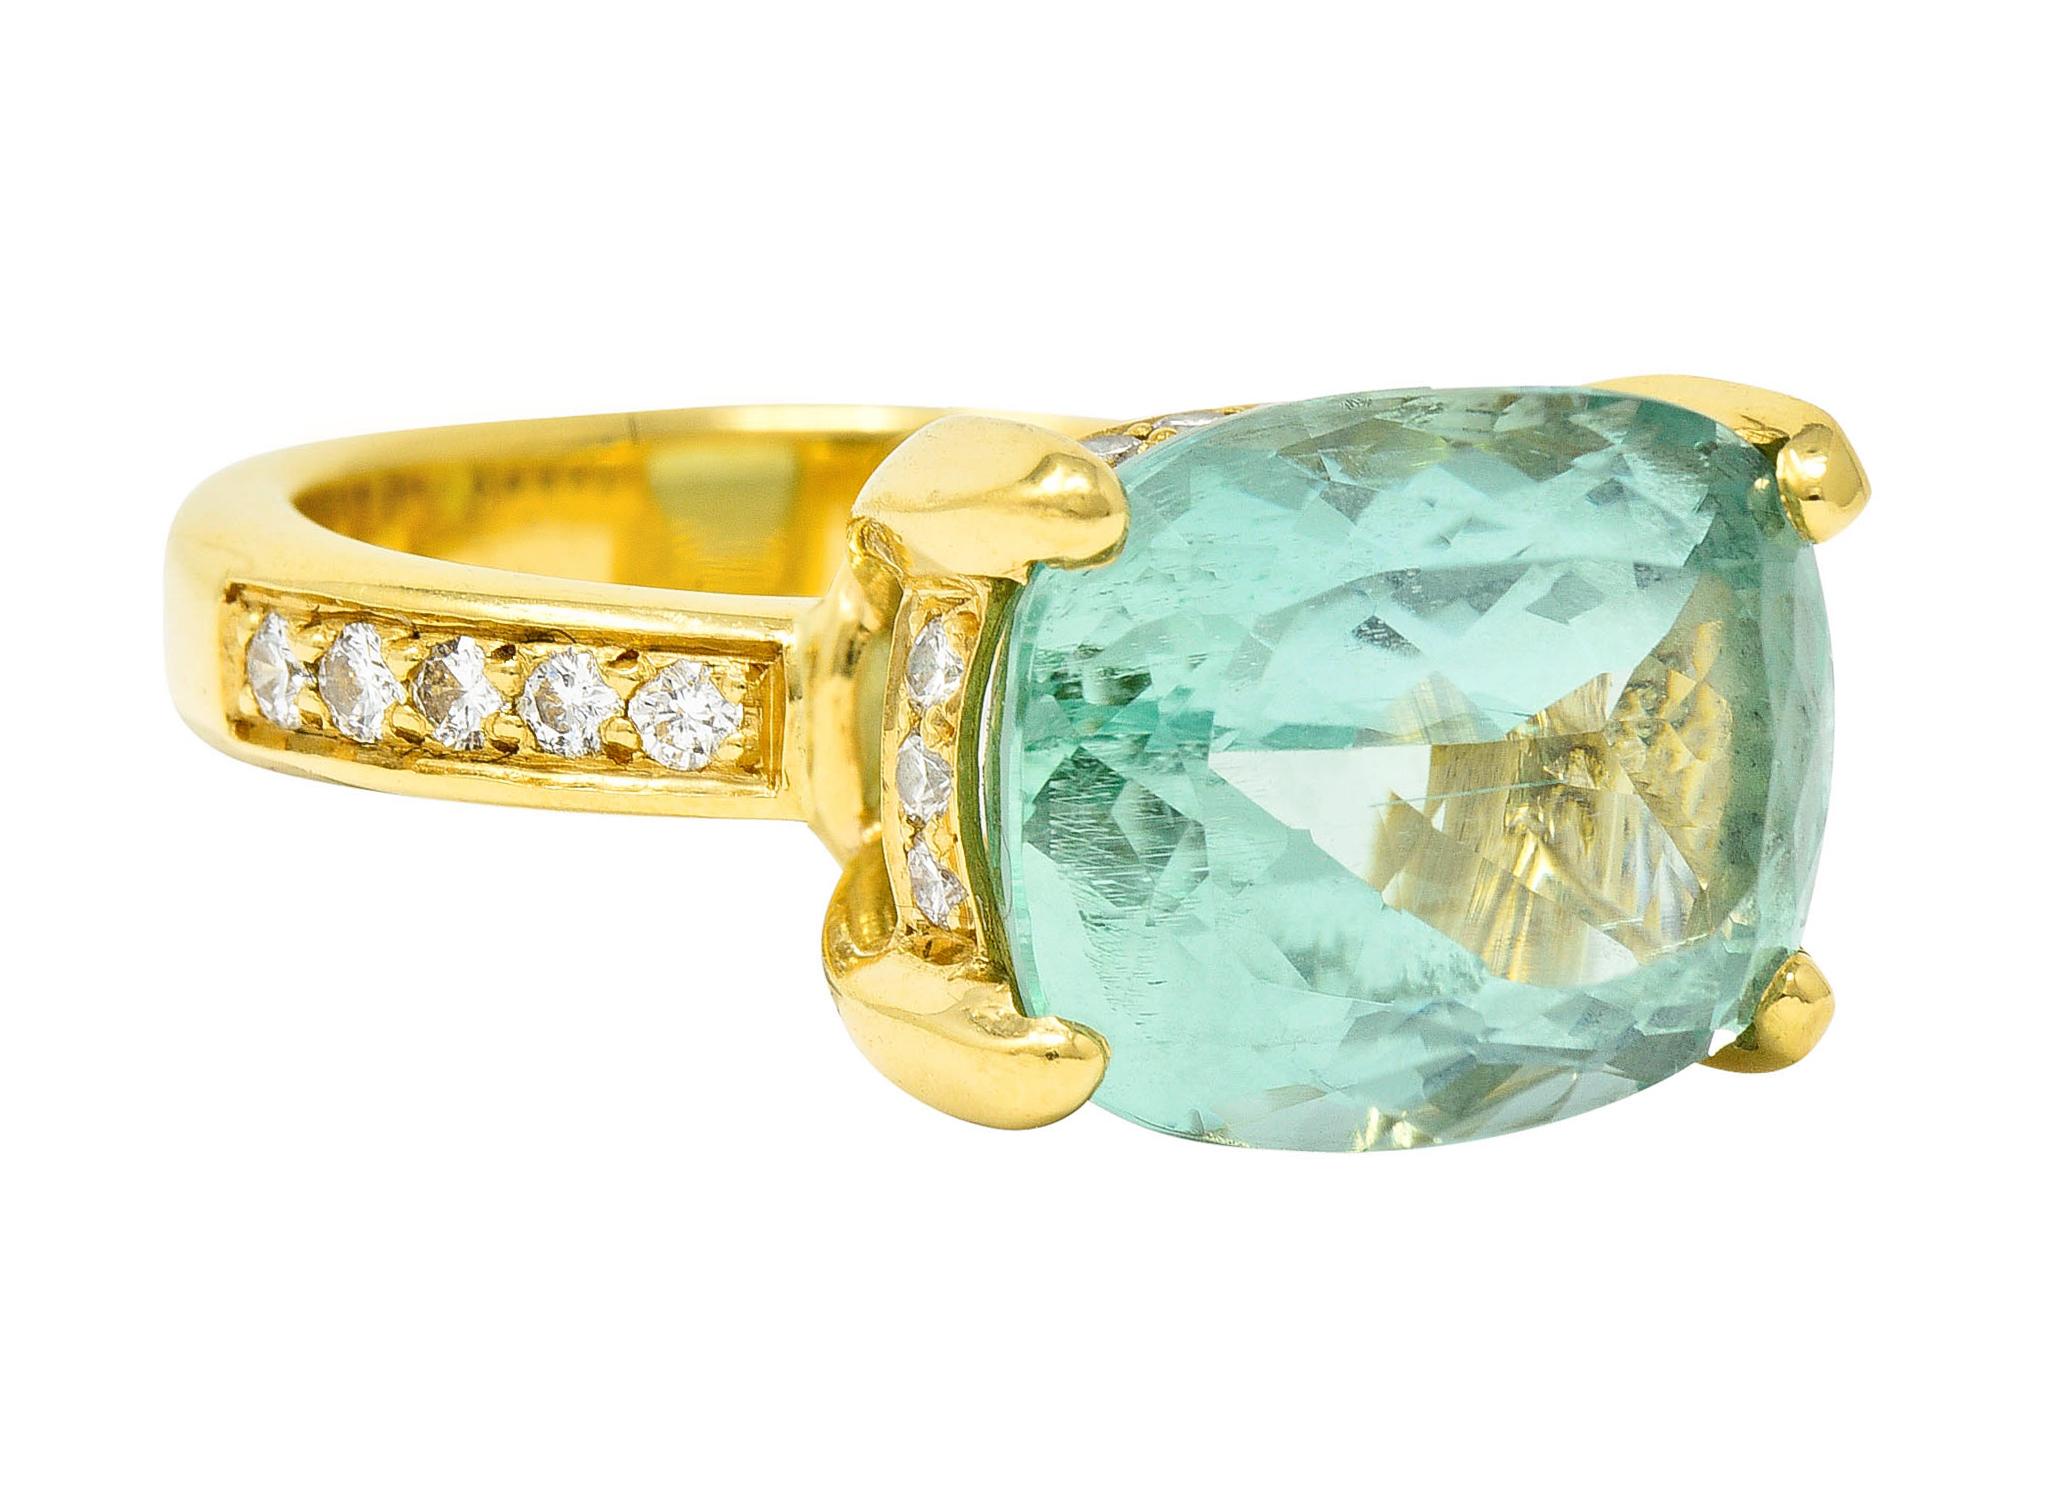 Featuring a mixed cushion cut beryl measuring approximately 15.0 x 11.5 mm

Transparent and uniform in medium light strongly bluish green color

Basket set by wide prongs with round brilliant cut diamond accents throughout

Weighing in total